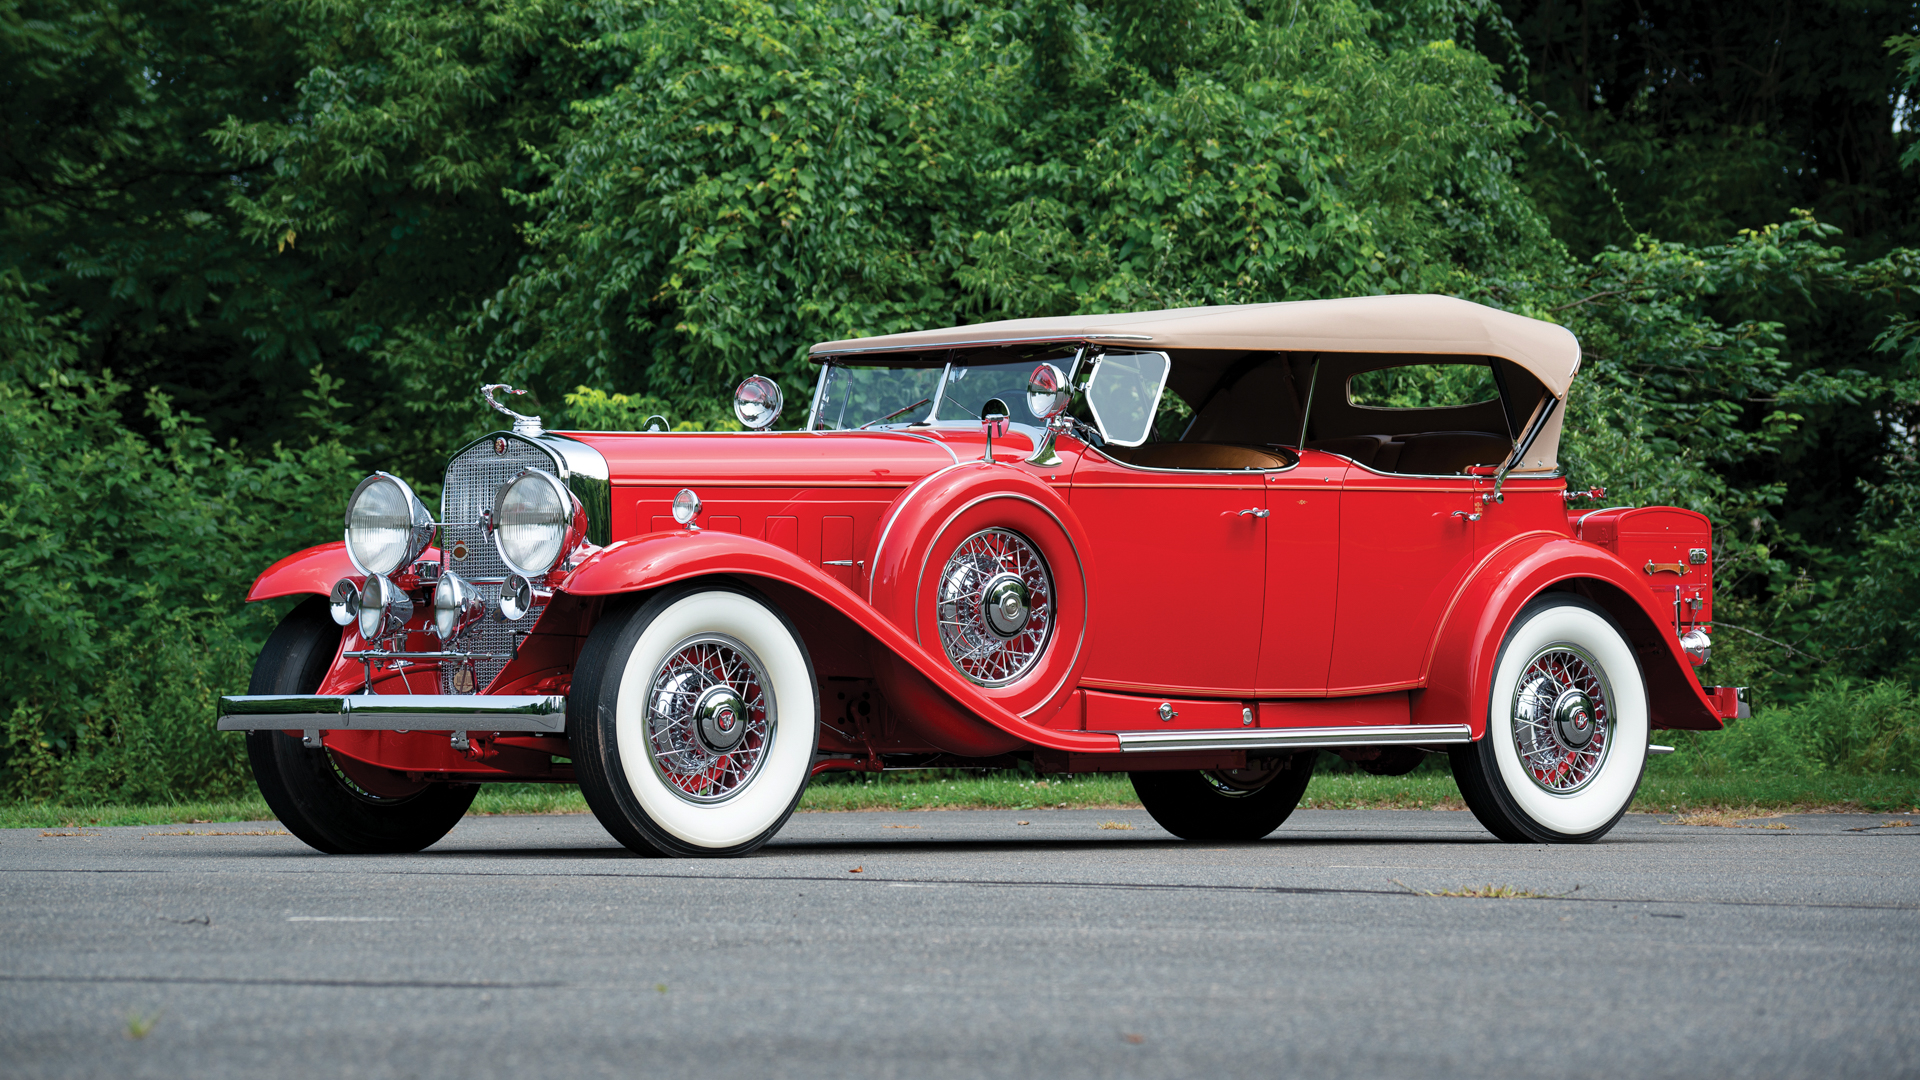 How Much It Costs To Own These 5 Vintage Cars